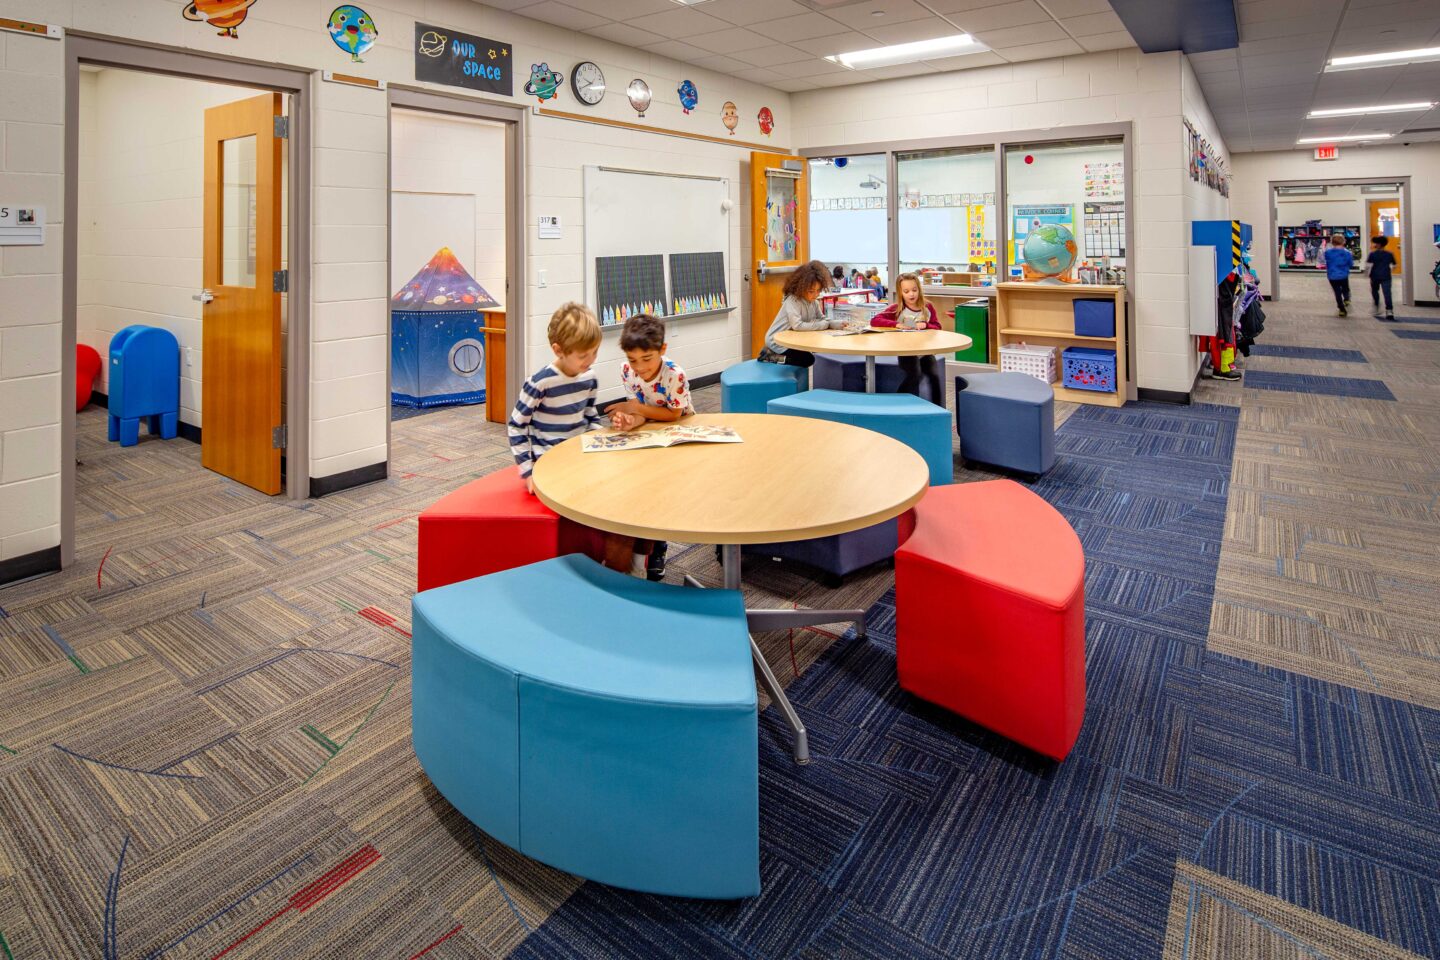 Elementary students work at a round table in an open nook connected to classrooms at Pewaukee Lake Elementary School